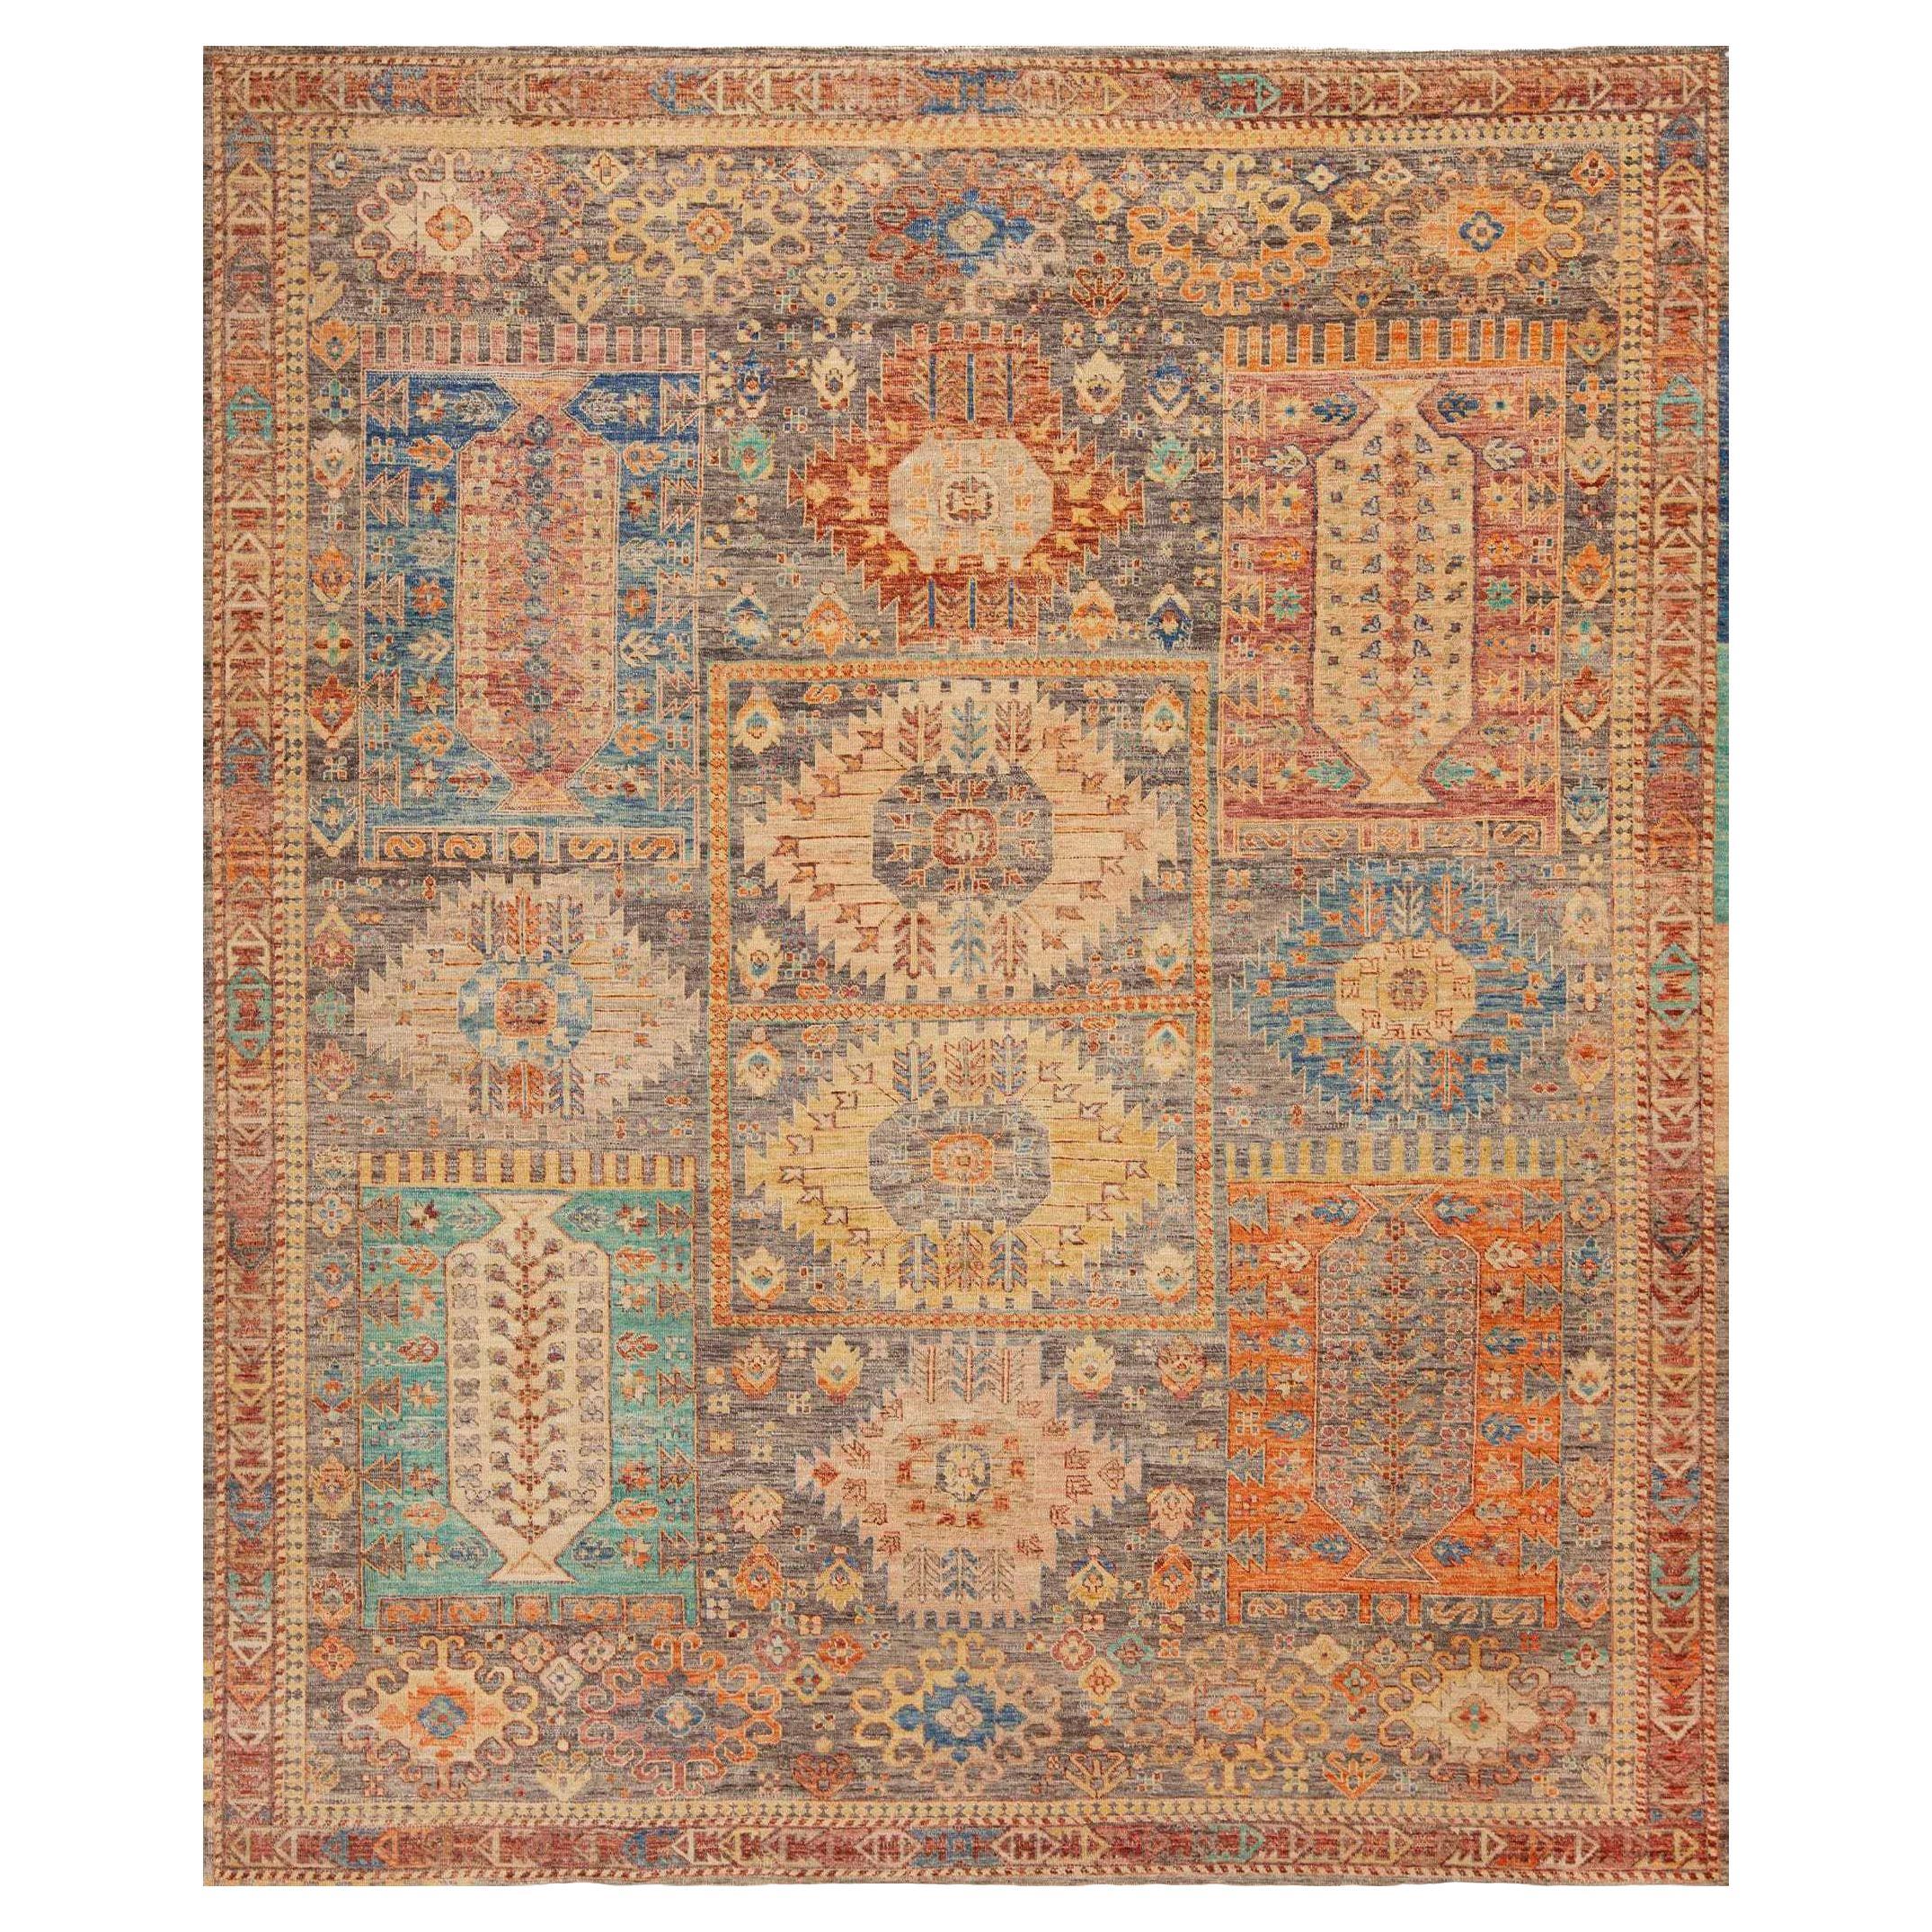 Nazmiyal Collection Rustic Tribal Allover Design Modern Area Rug 8'3" x 9'6" For Sale